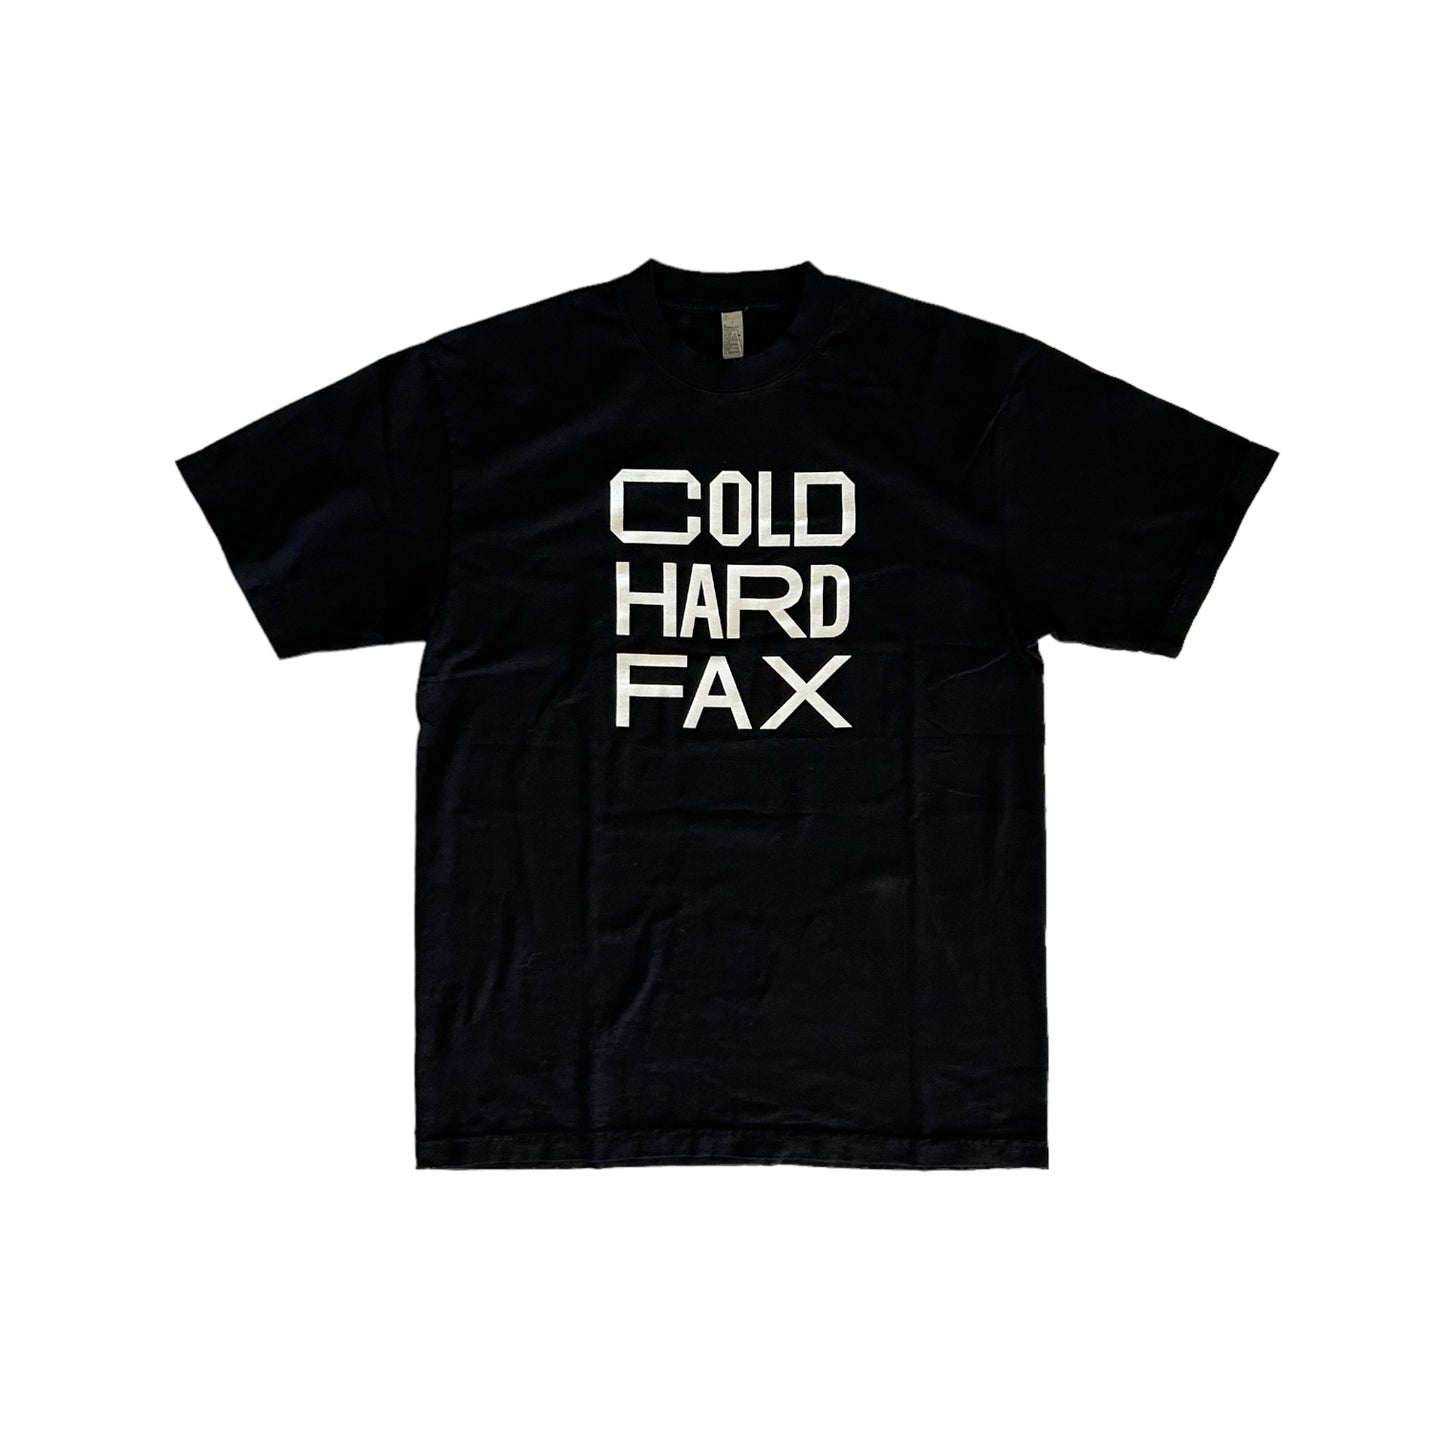 DVSN West Cold Hard Fax Tee - Black/White